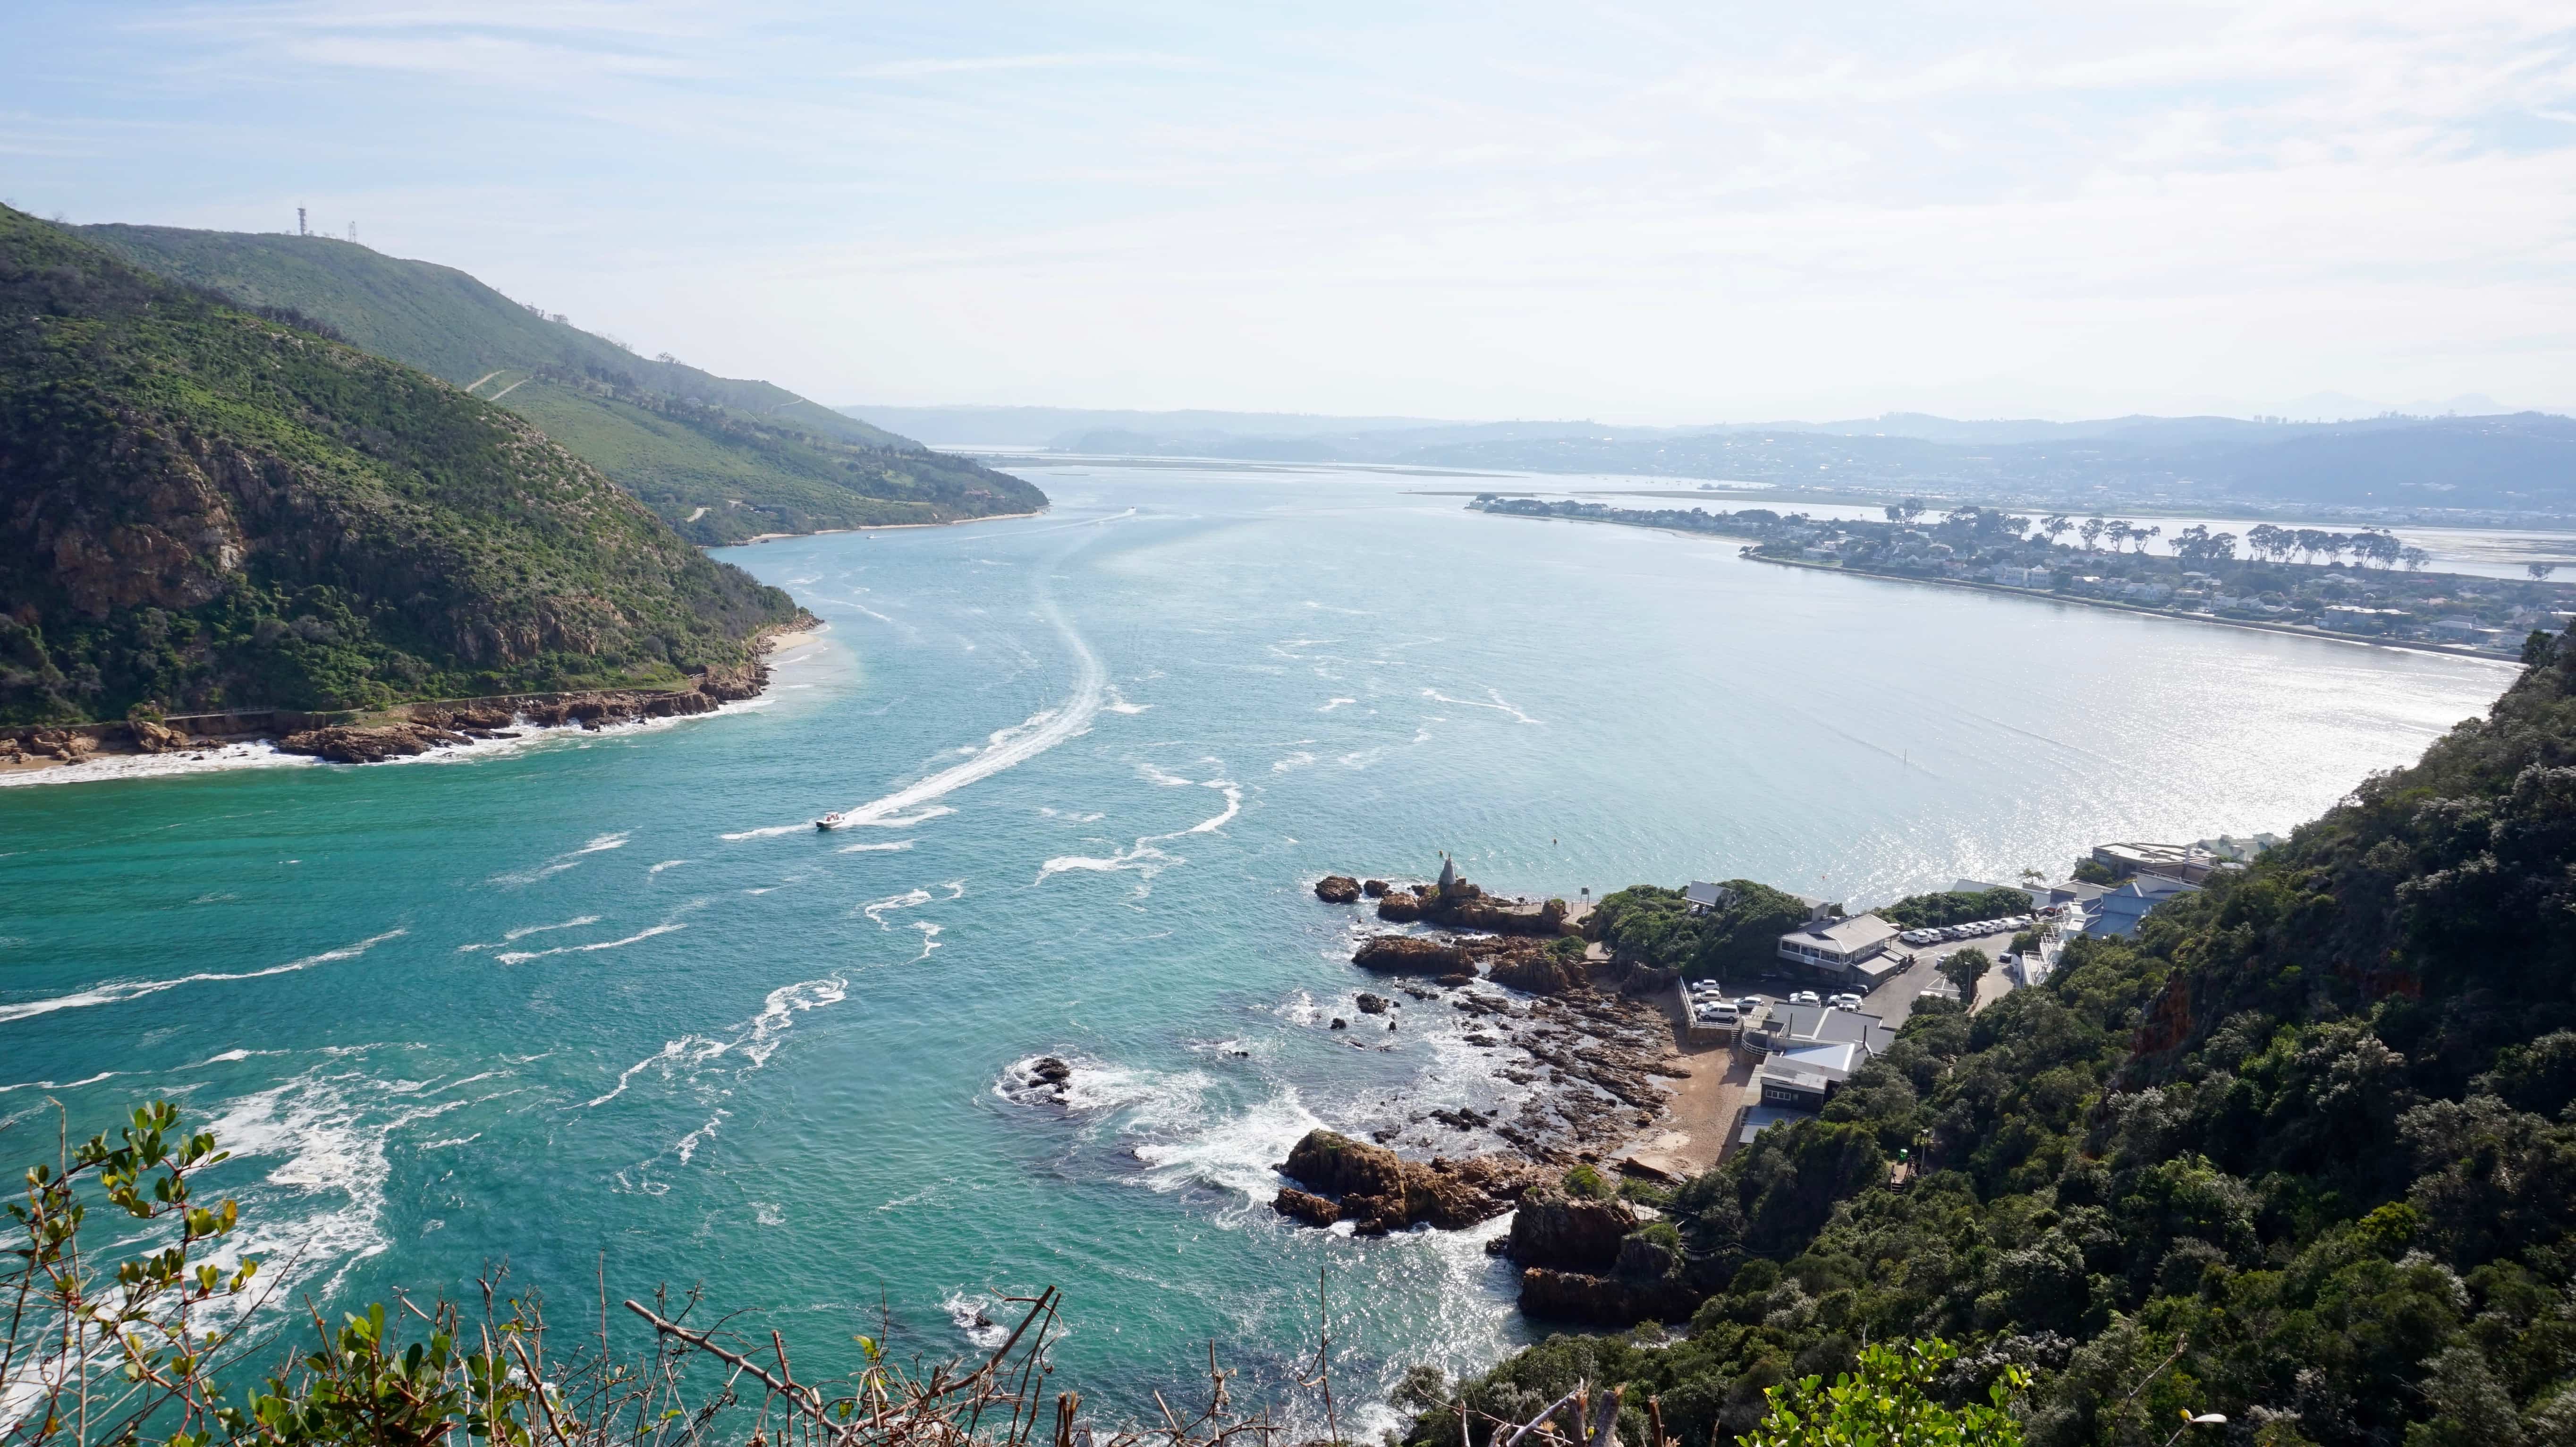 View from East Head over the sea in Knysna, South Africa